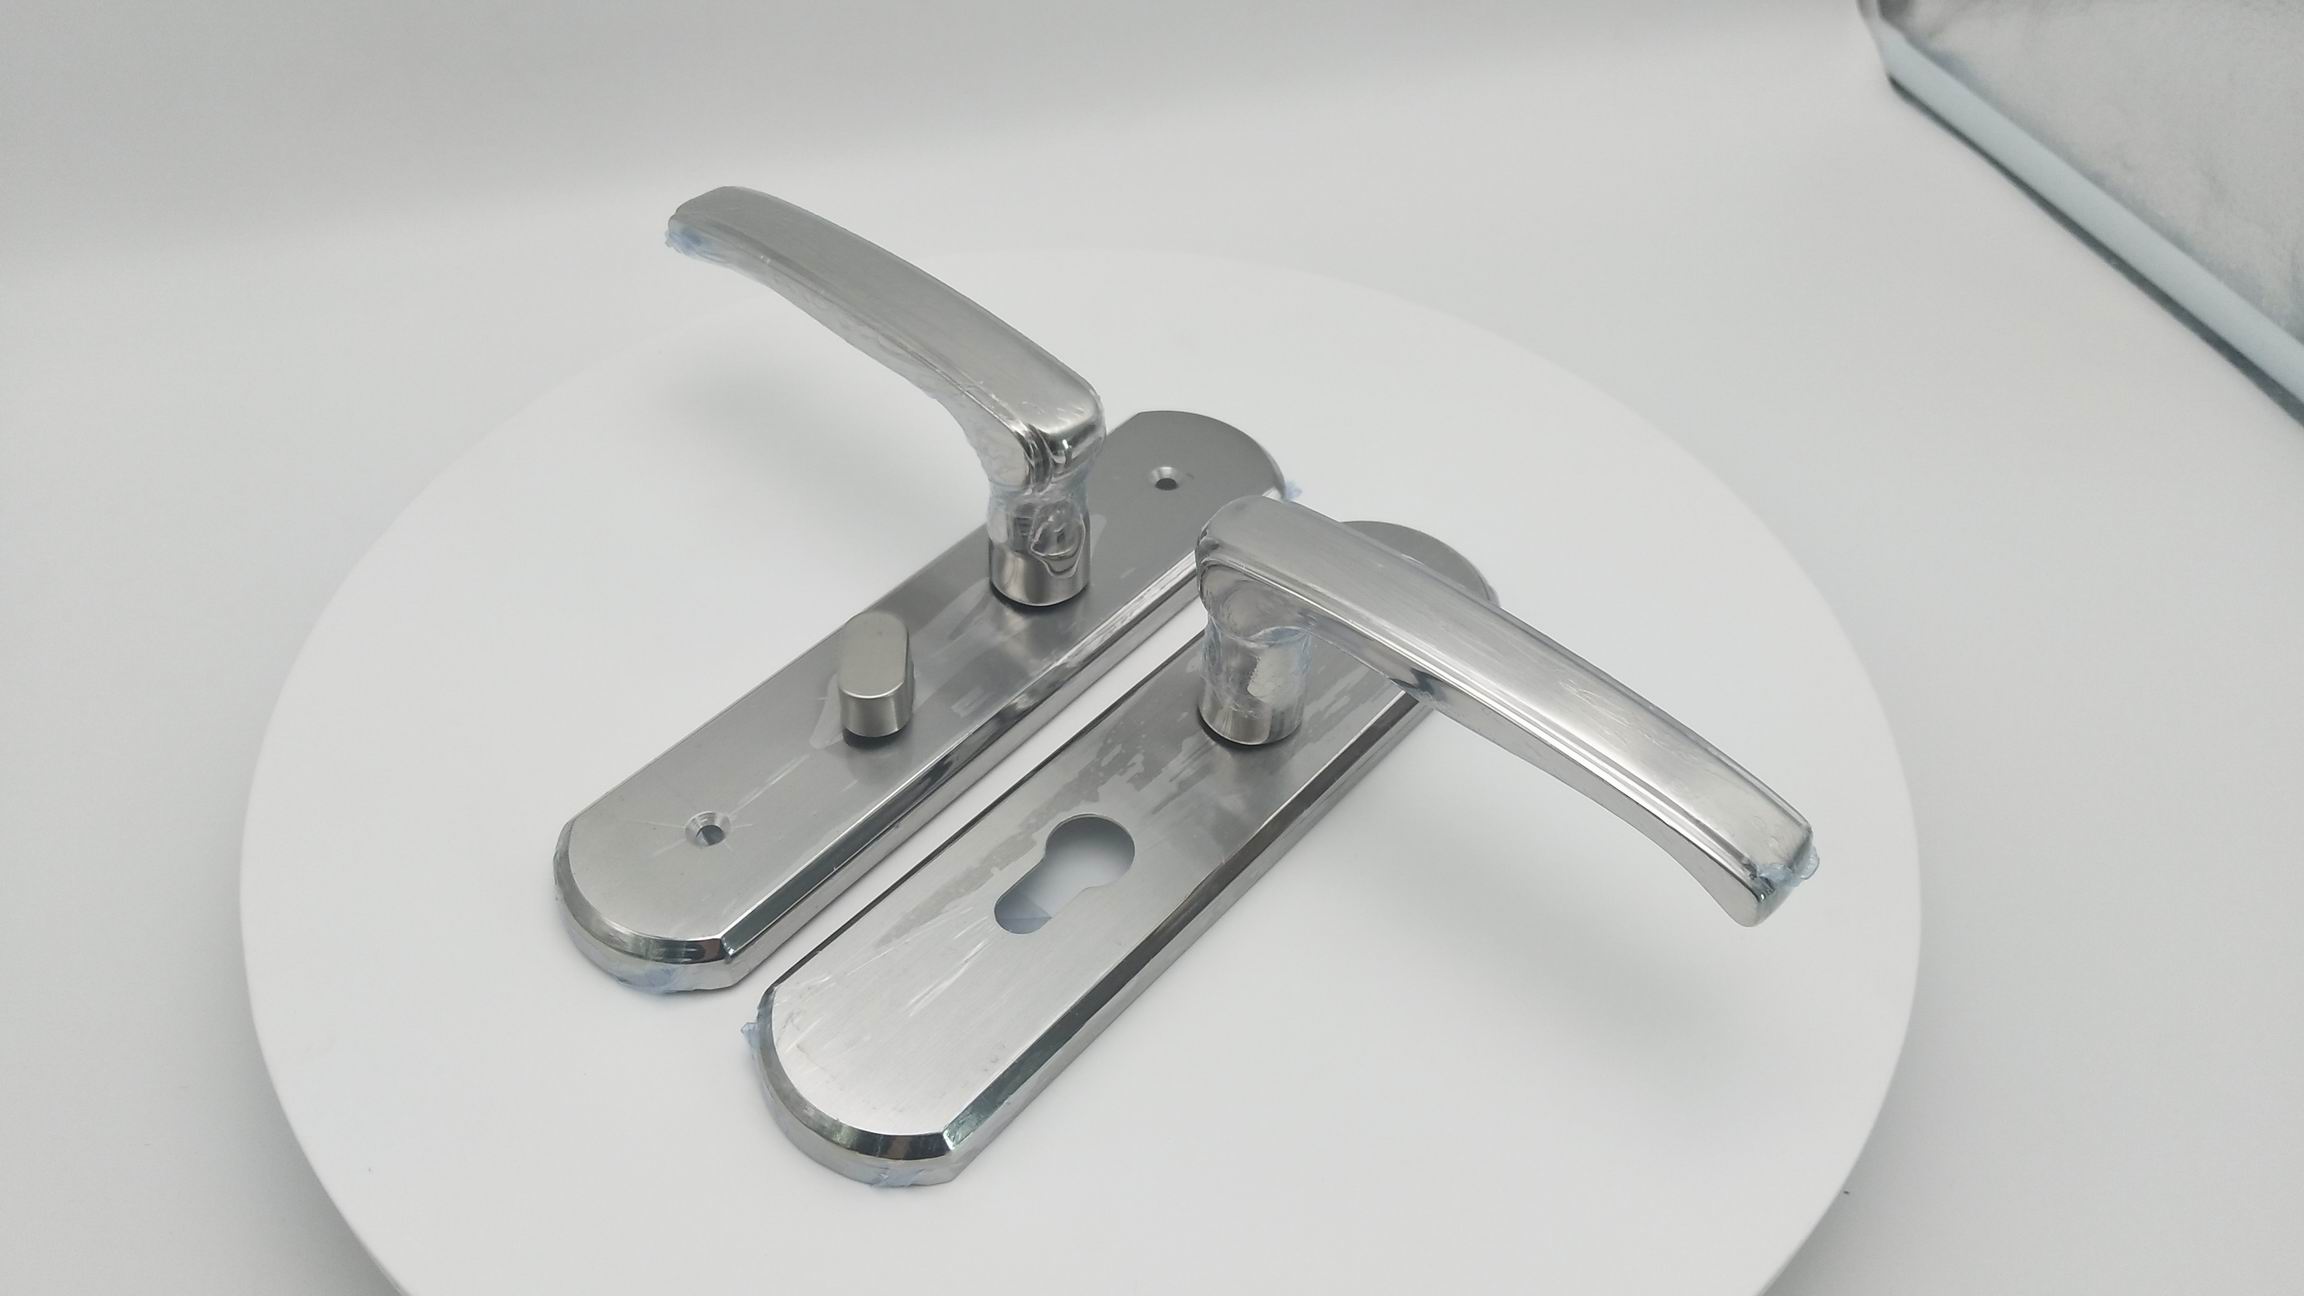 High quality stainless steel 304 toilet door lock with lock cylinder